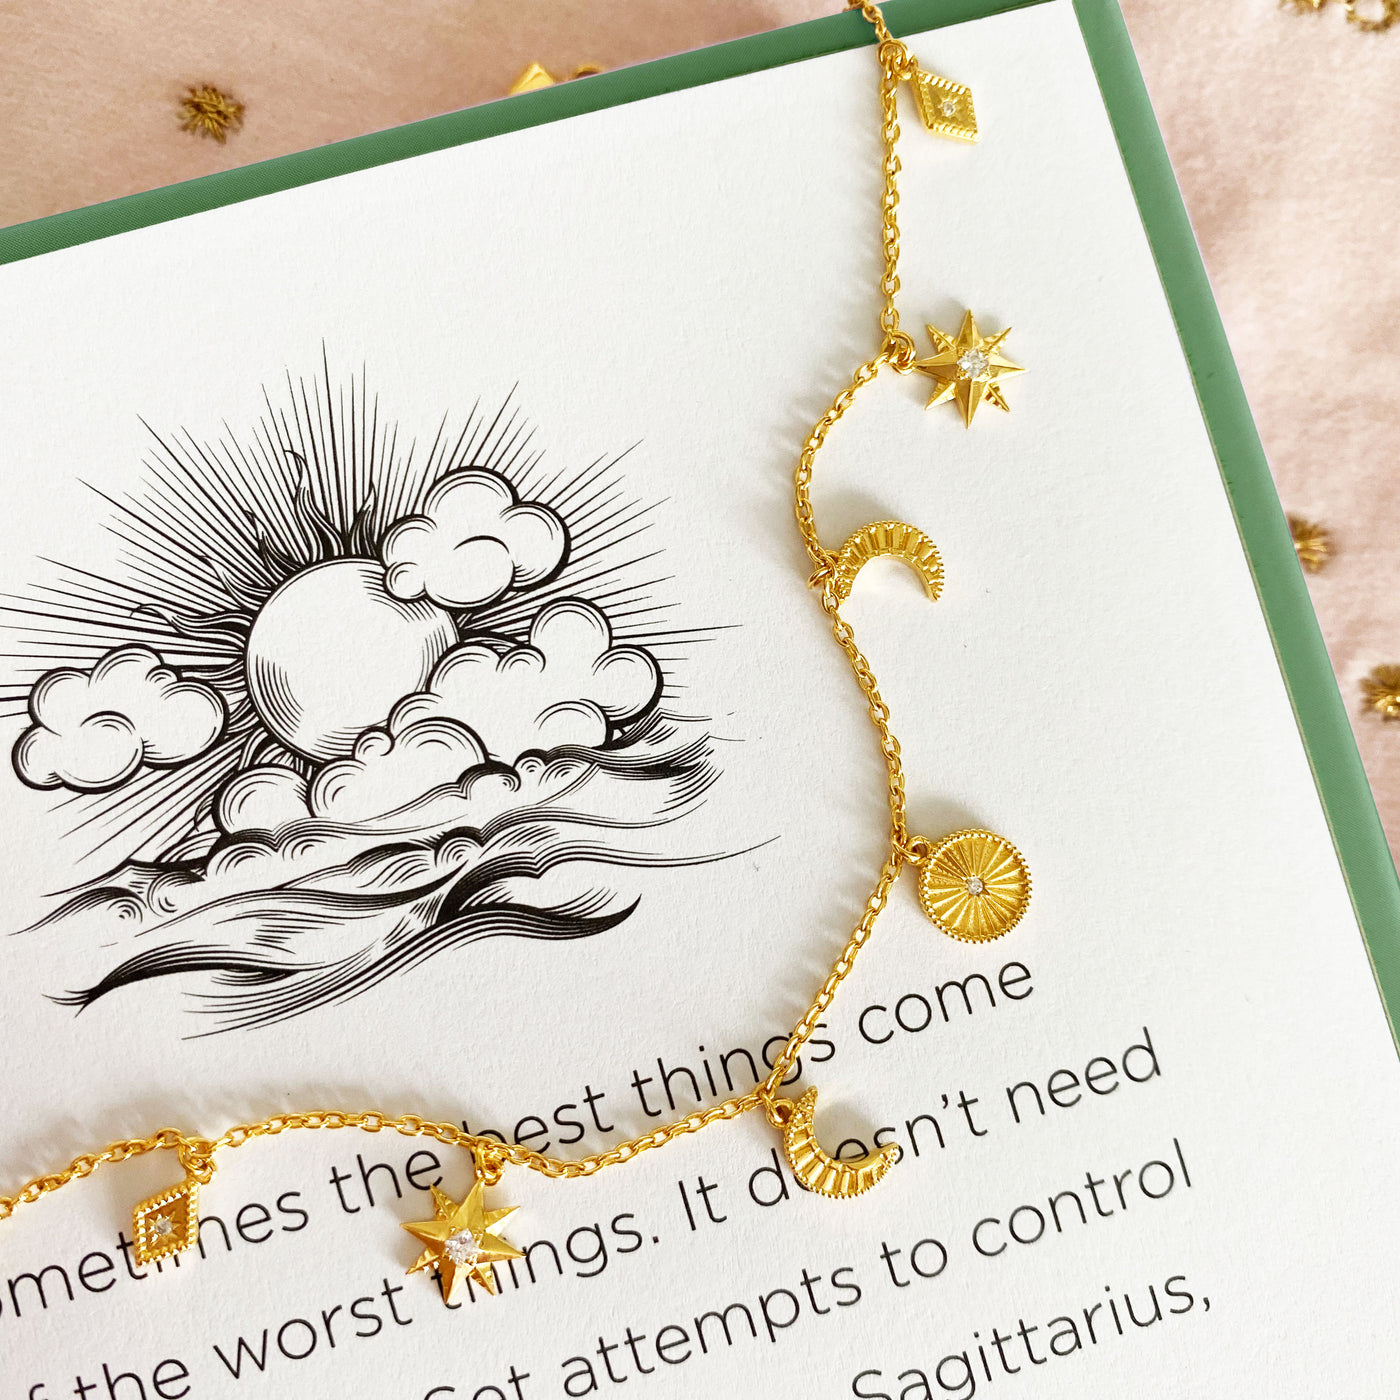 Gold plated sterling Silver moon and star charm bracelet with CZ crystals on book